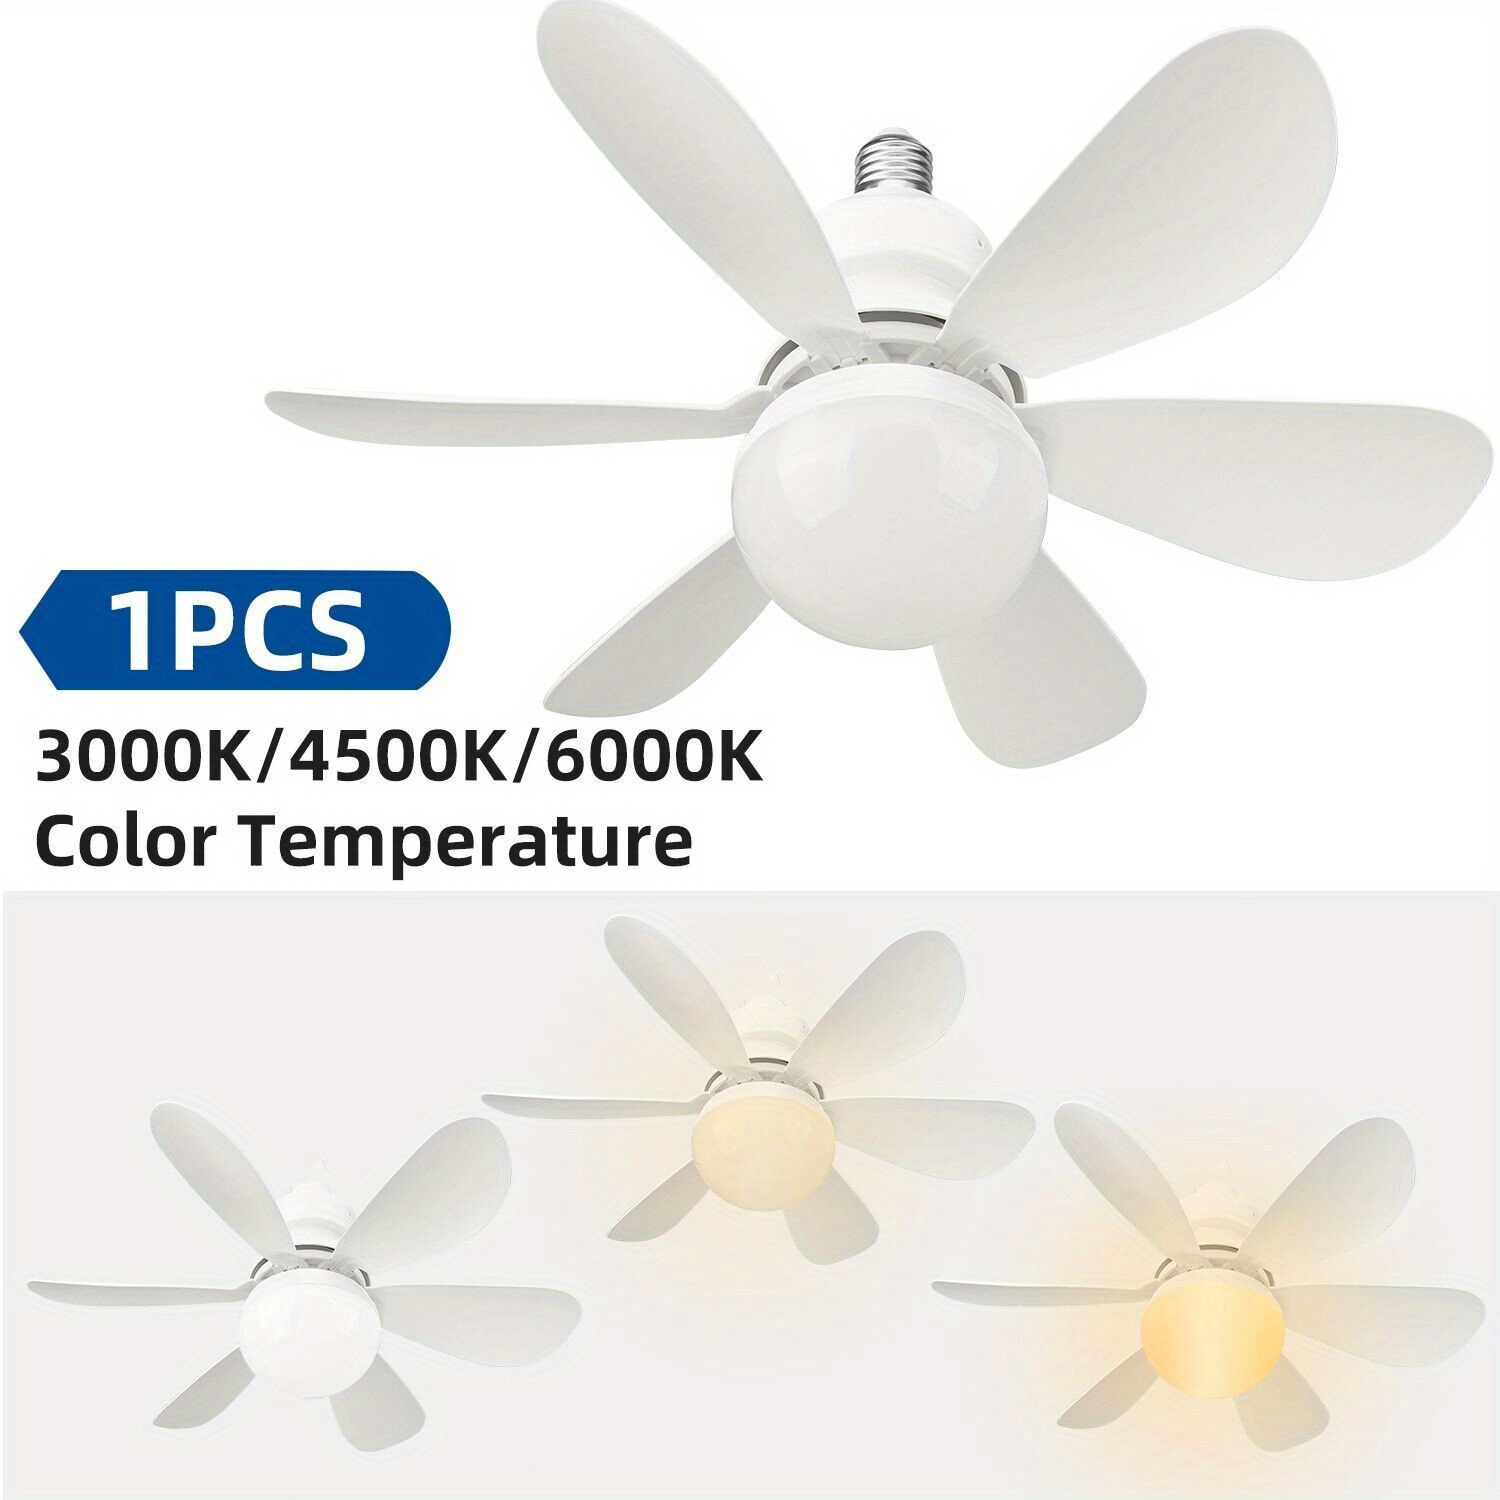 

1pc 30w 3 Speeds E27 Socket Fan Light, Screw Ceiling Fans With Lights And Remote Dimmable Led Light For Bathroom, Bedroom, Kitchen, Living Room